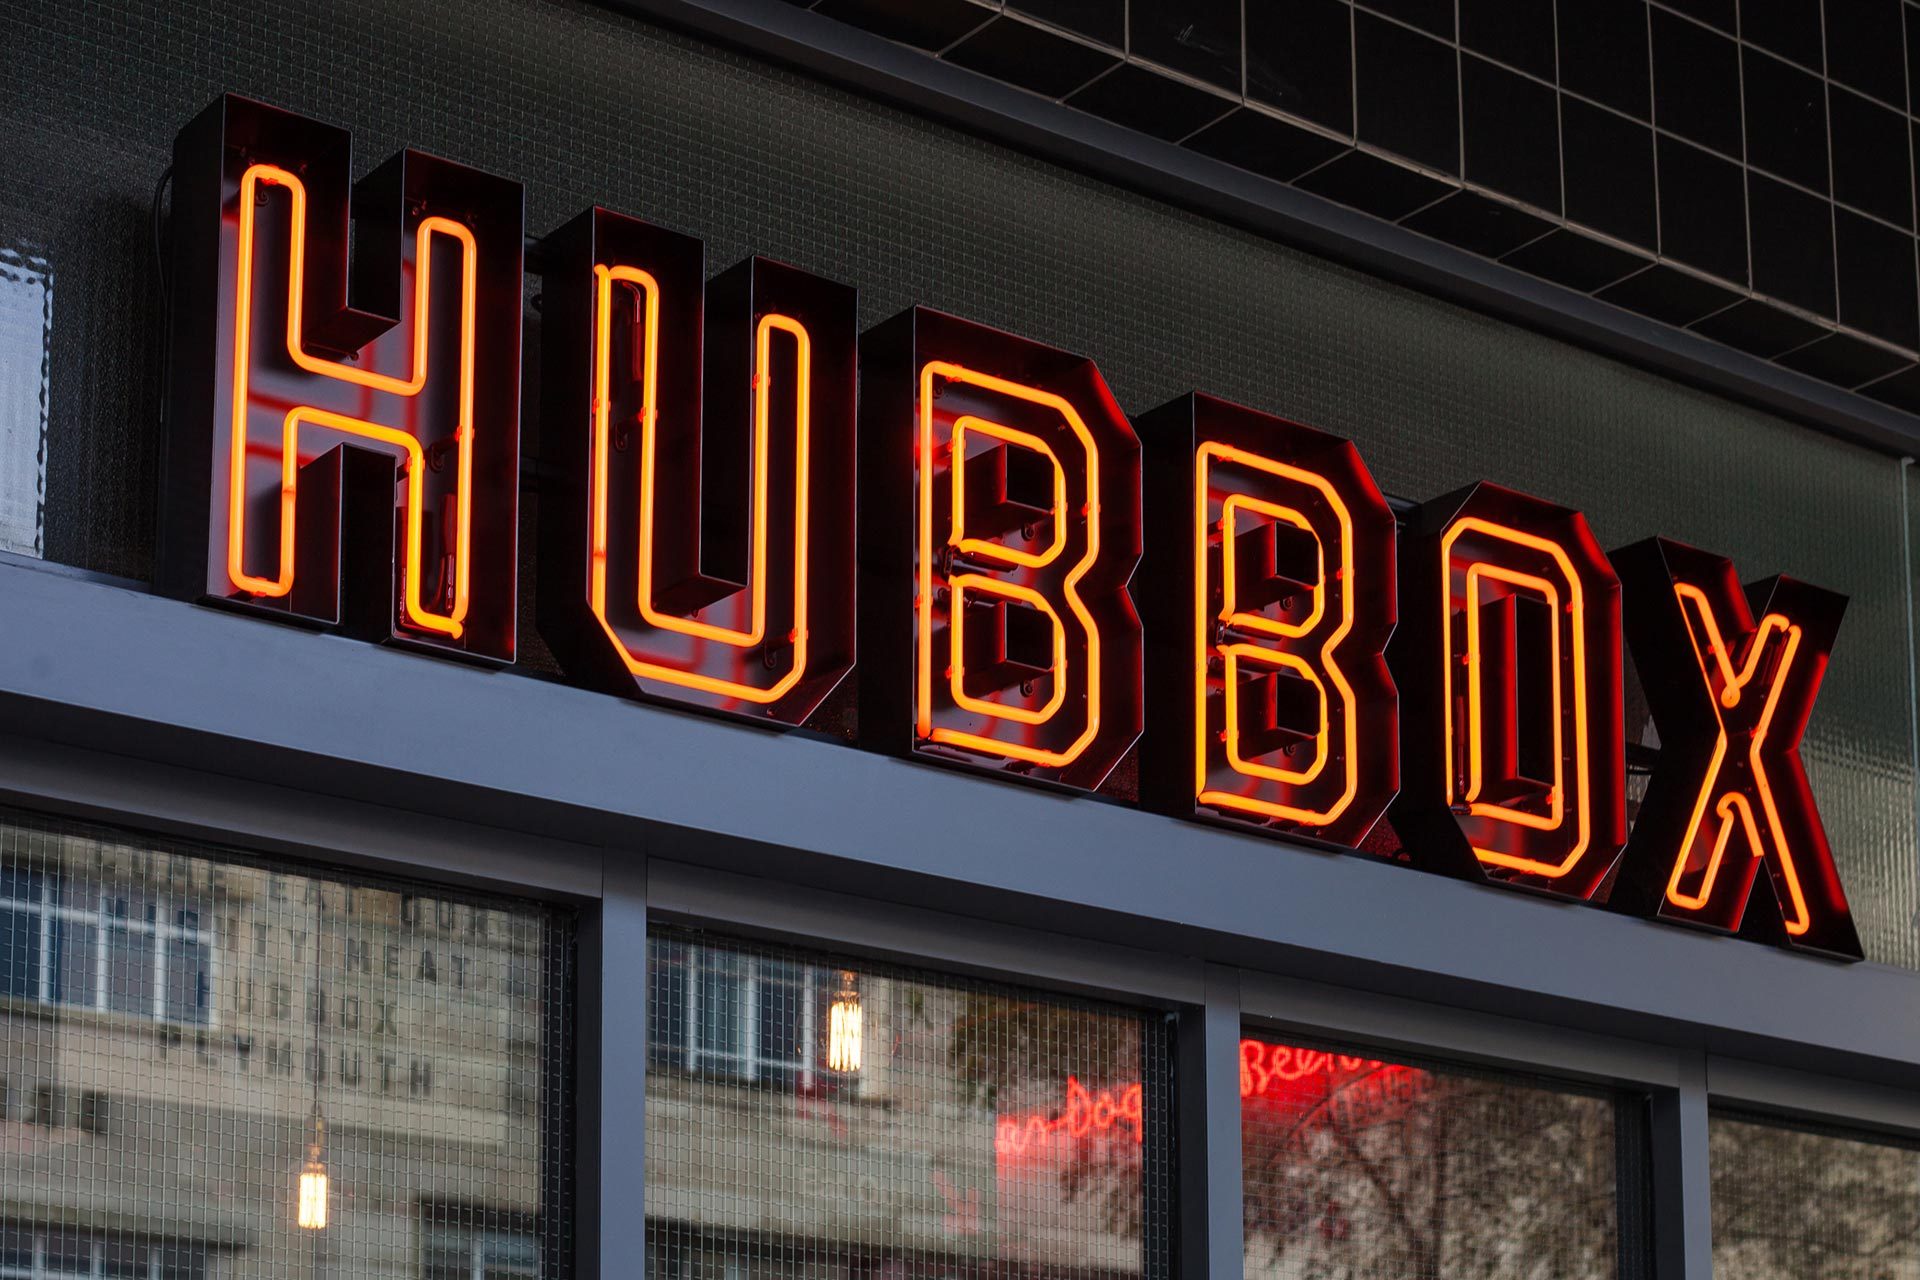 Plymouth - Hubbox